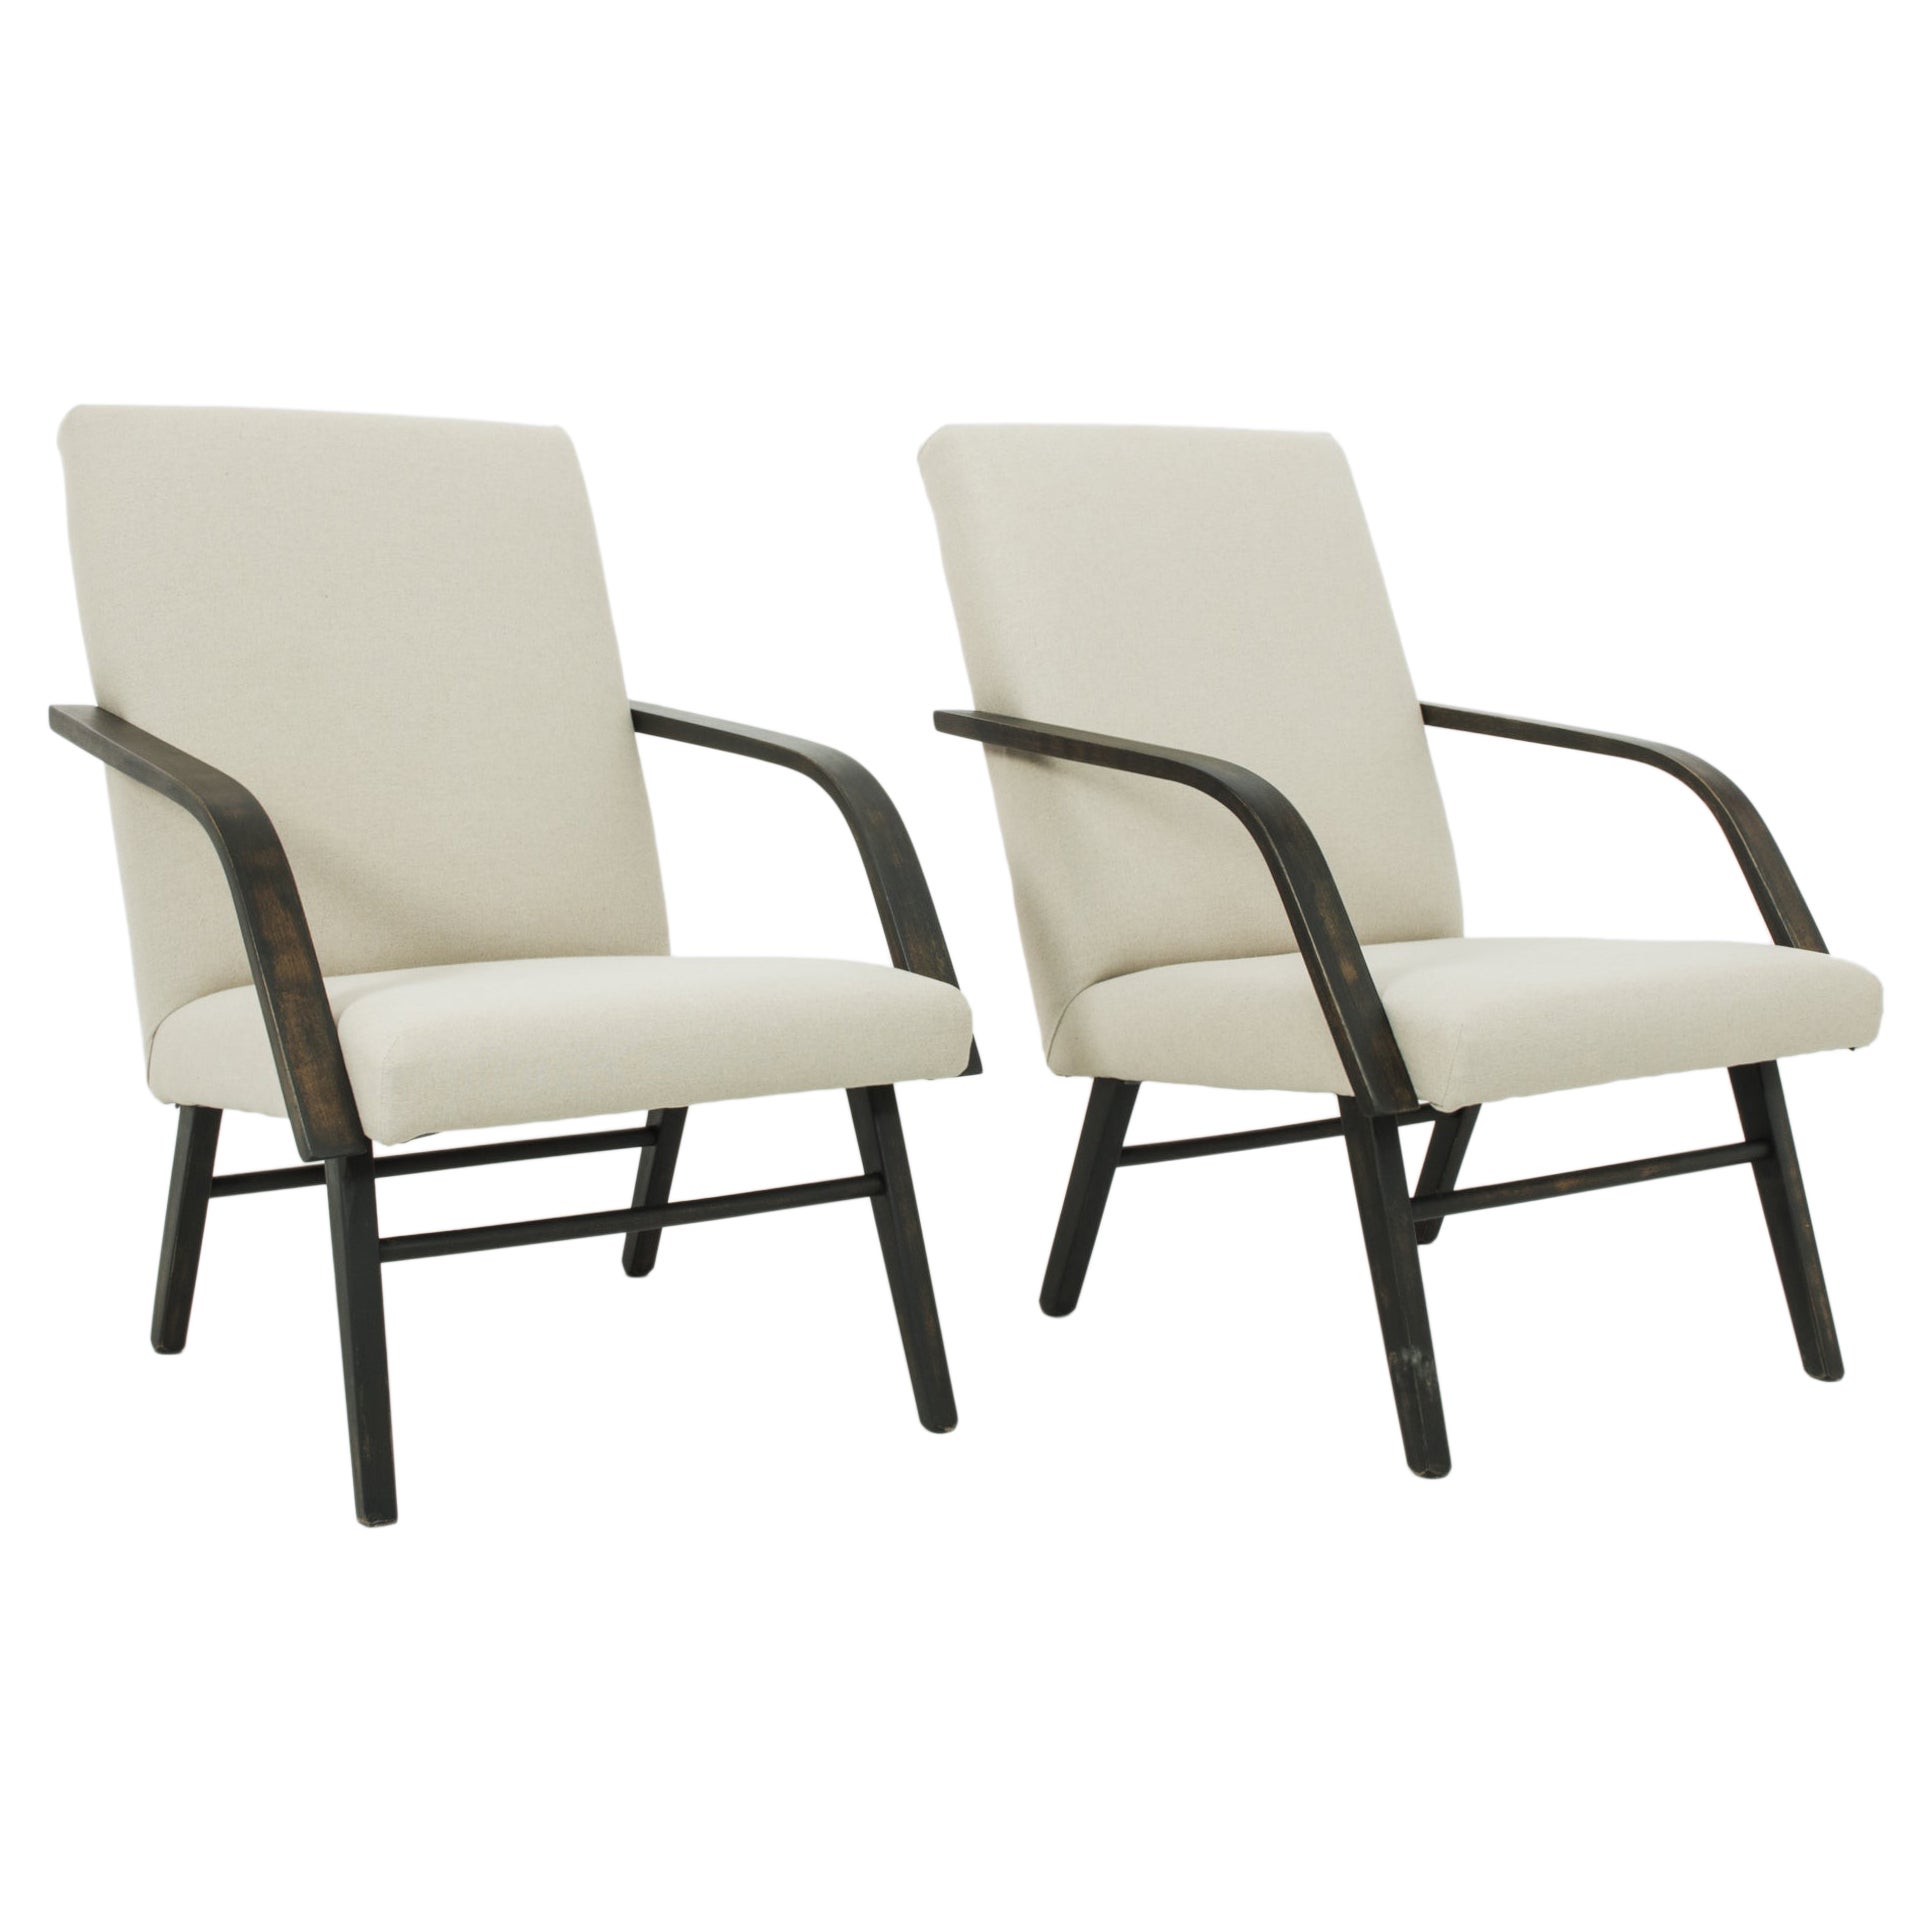 1960s Czechoslovakian Angular Upholstered Lounge Chairs, a Pair For Sale